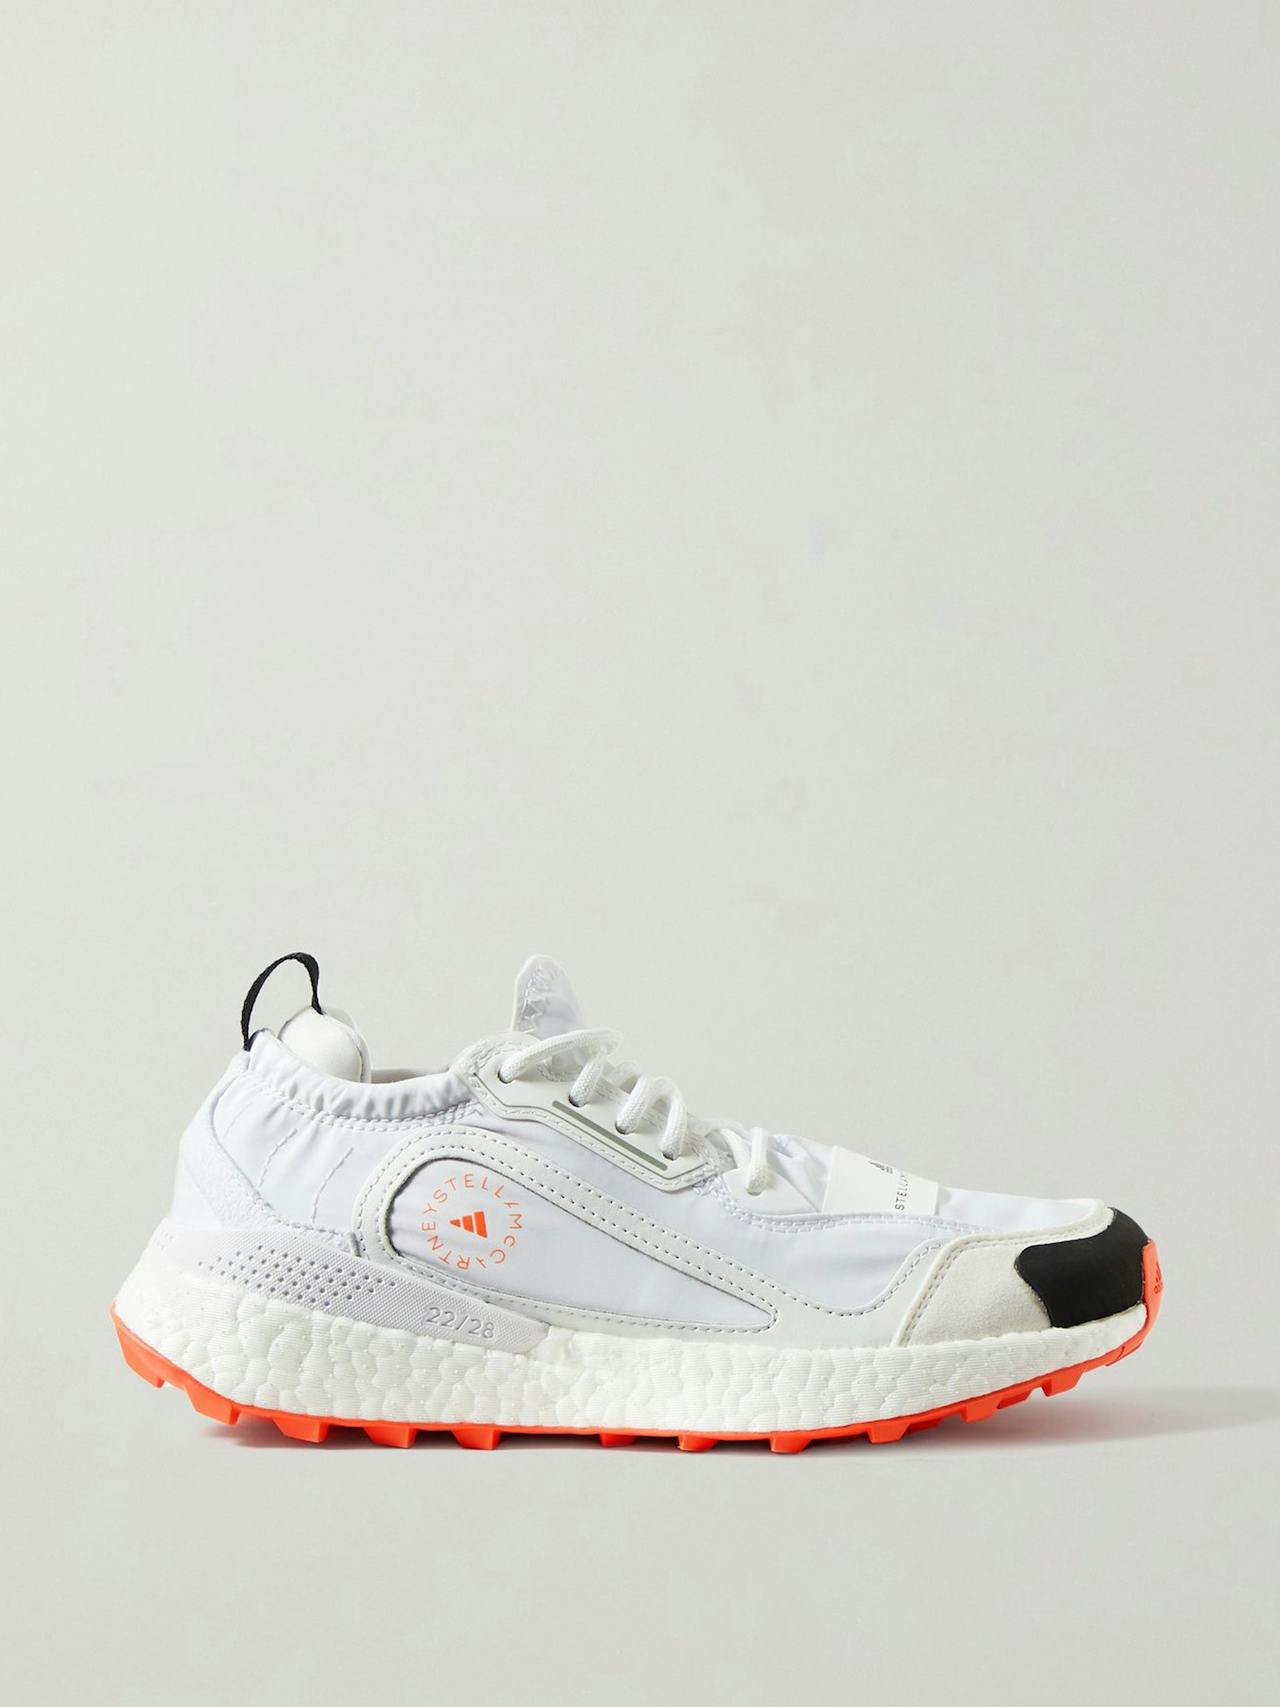 White Outdoorboost 2.0 sneakers